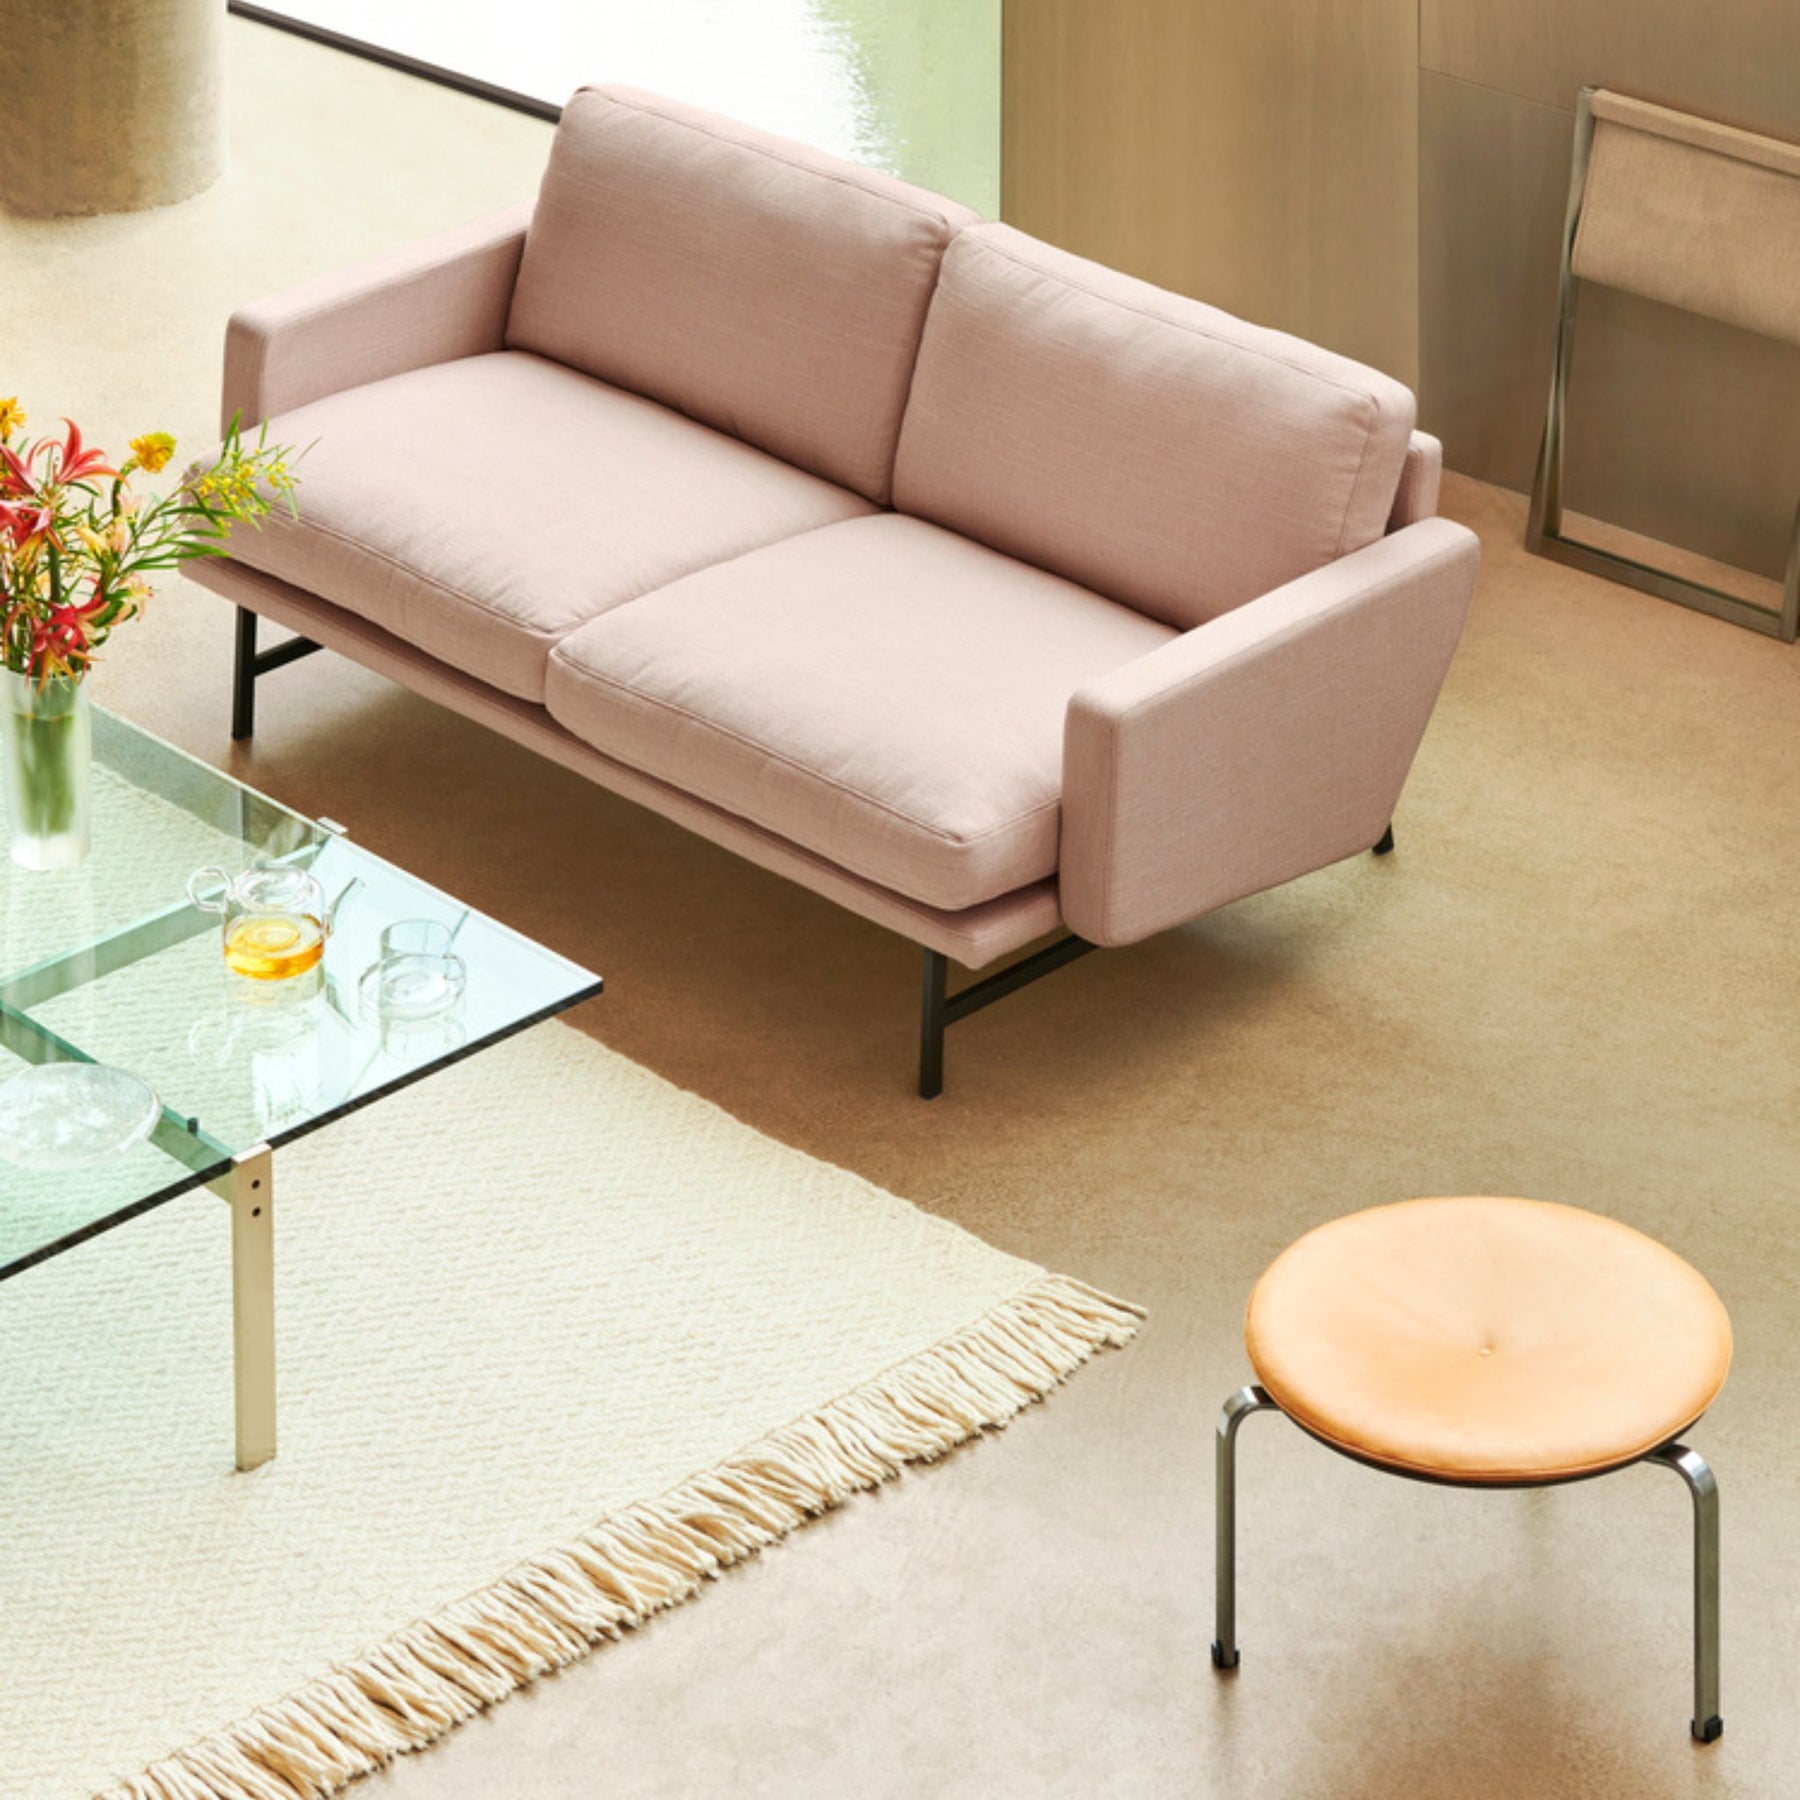 Fritz Hansen Lissoni Sofa Light Pink in room with Poul Kjaerholm coffee Table and Stool